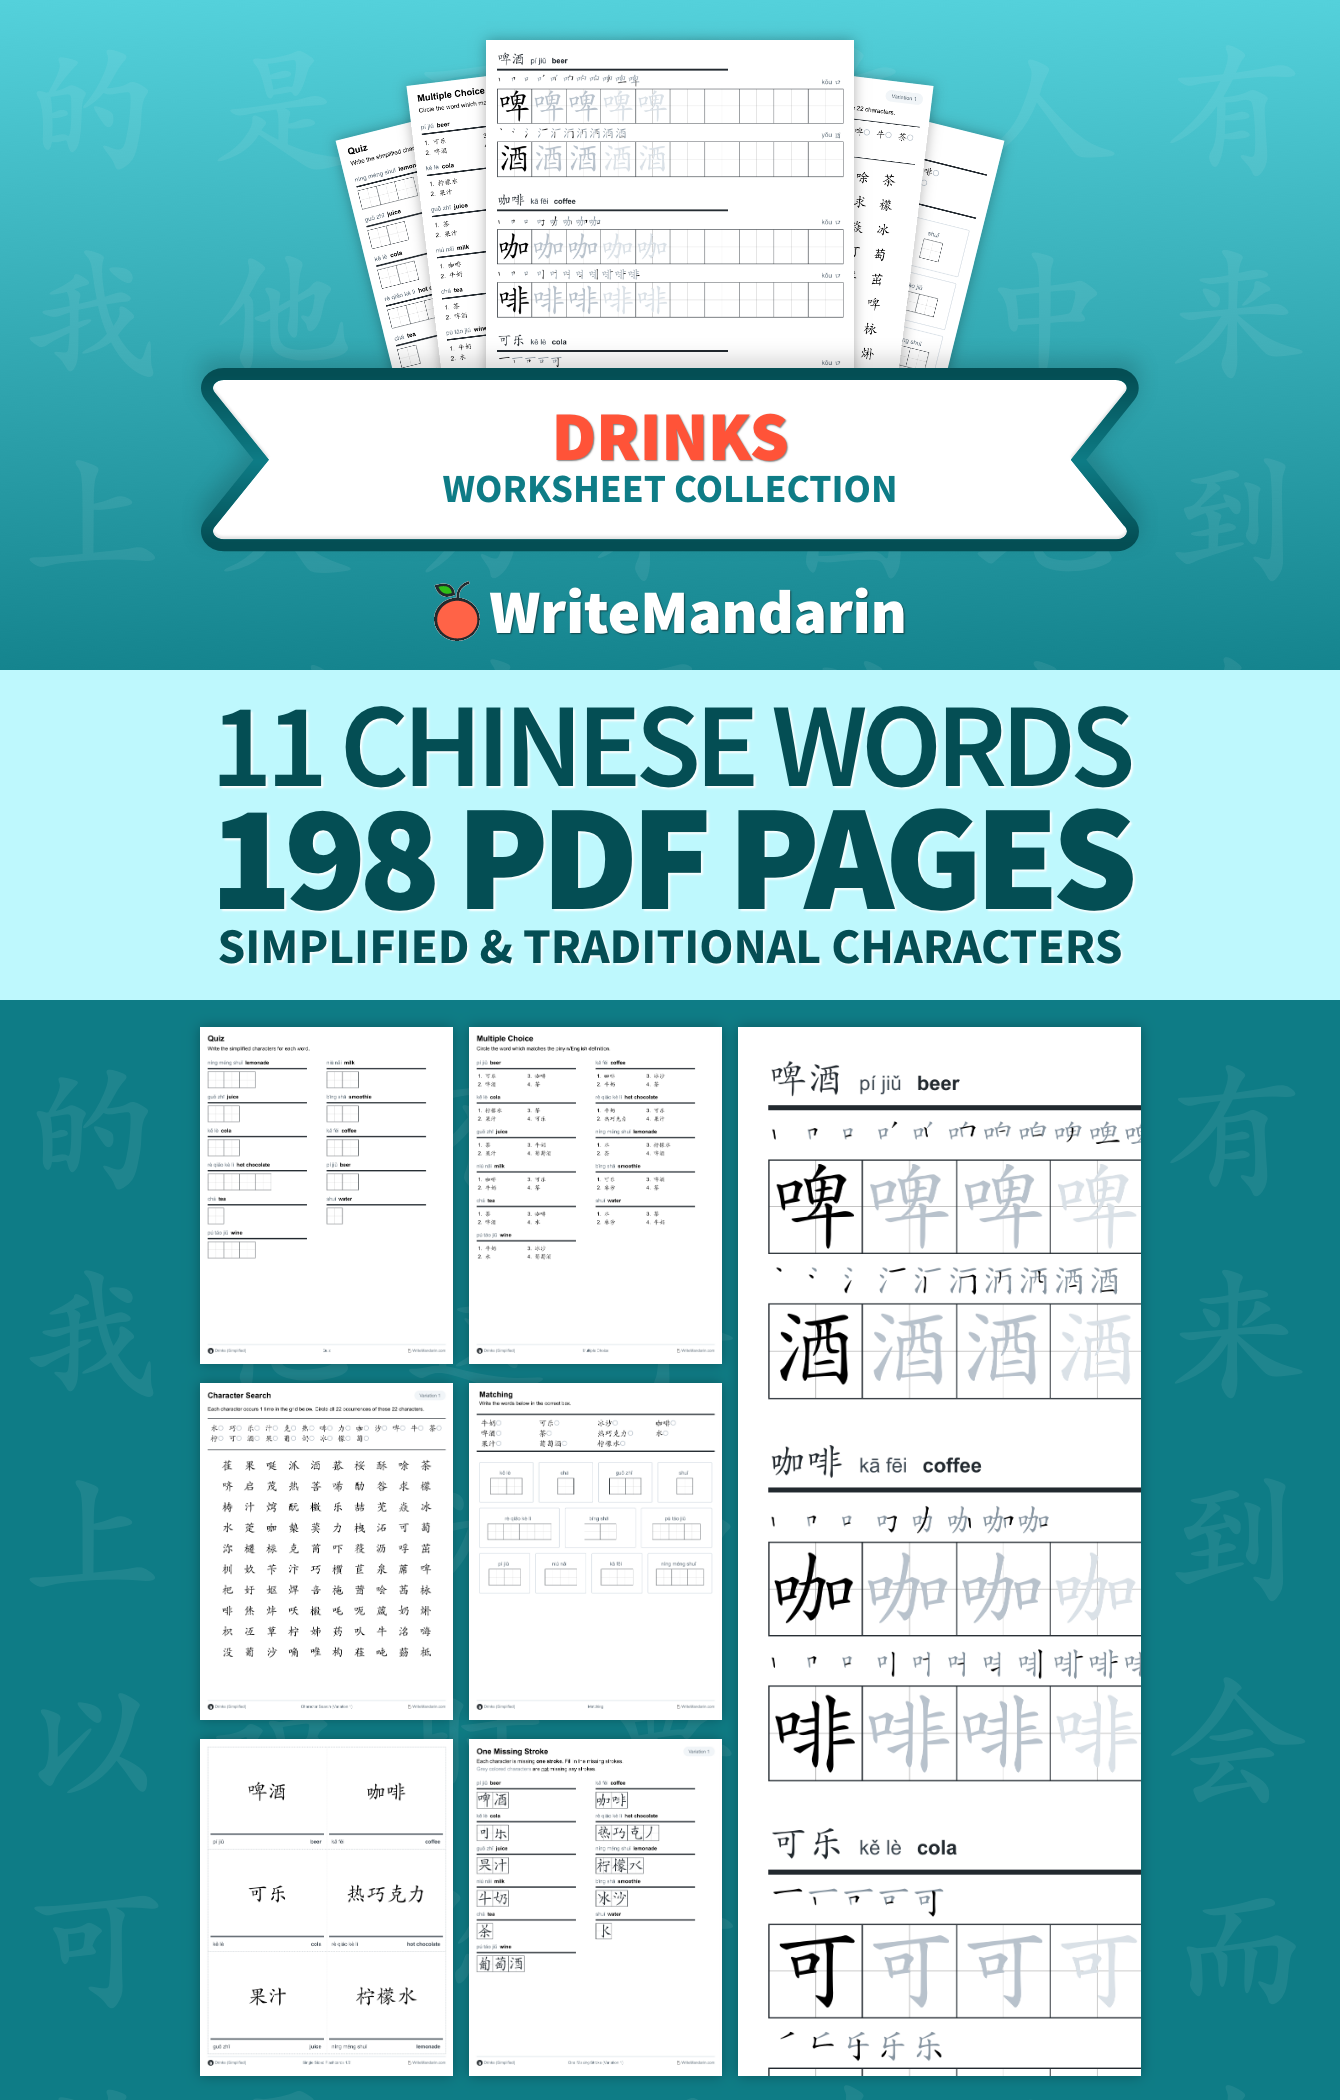 Preview image of Drinks worksheet collection